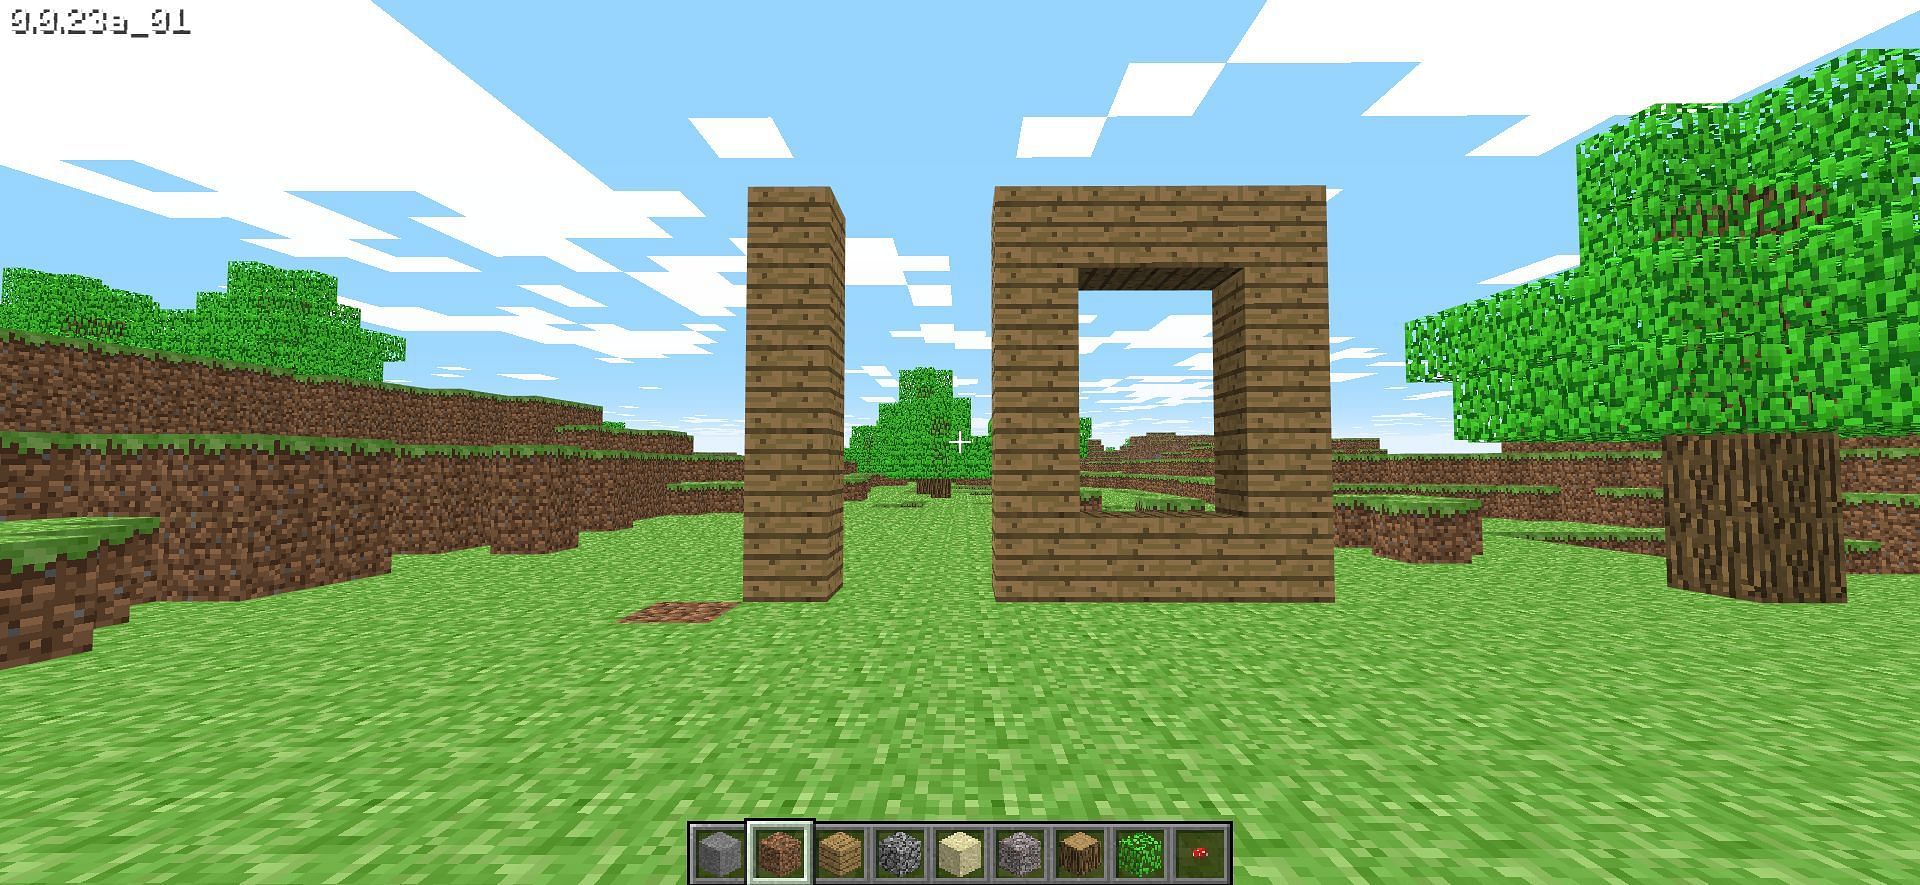 Old Minecraft! At classic.minecraft.net (Multiplayer available) : r/ Minecraft